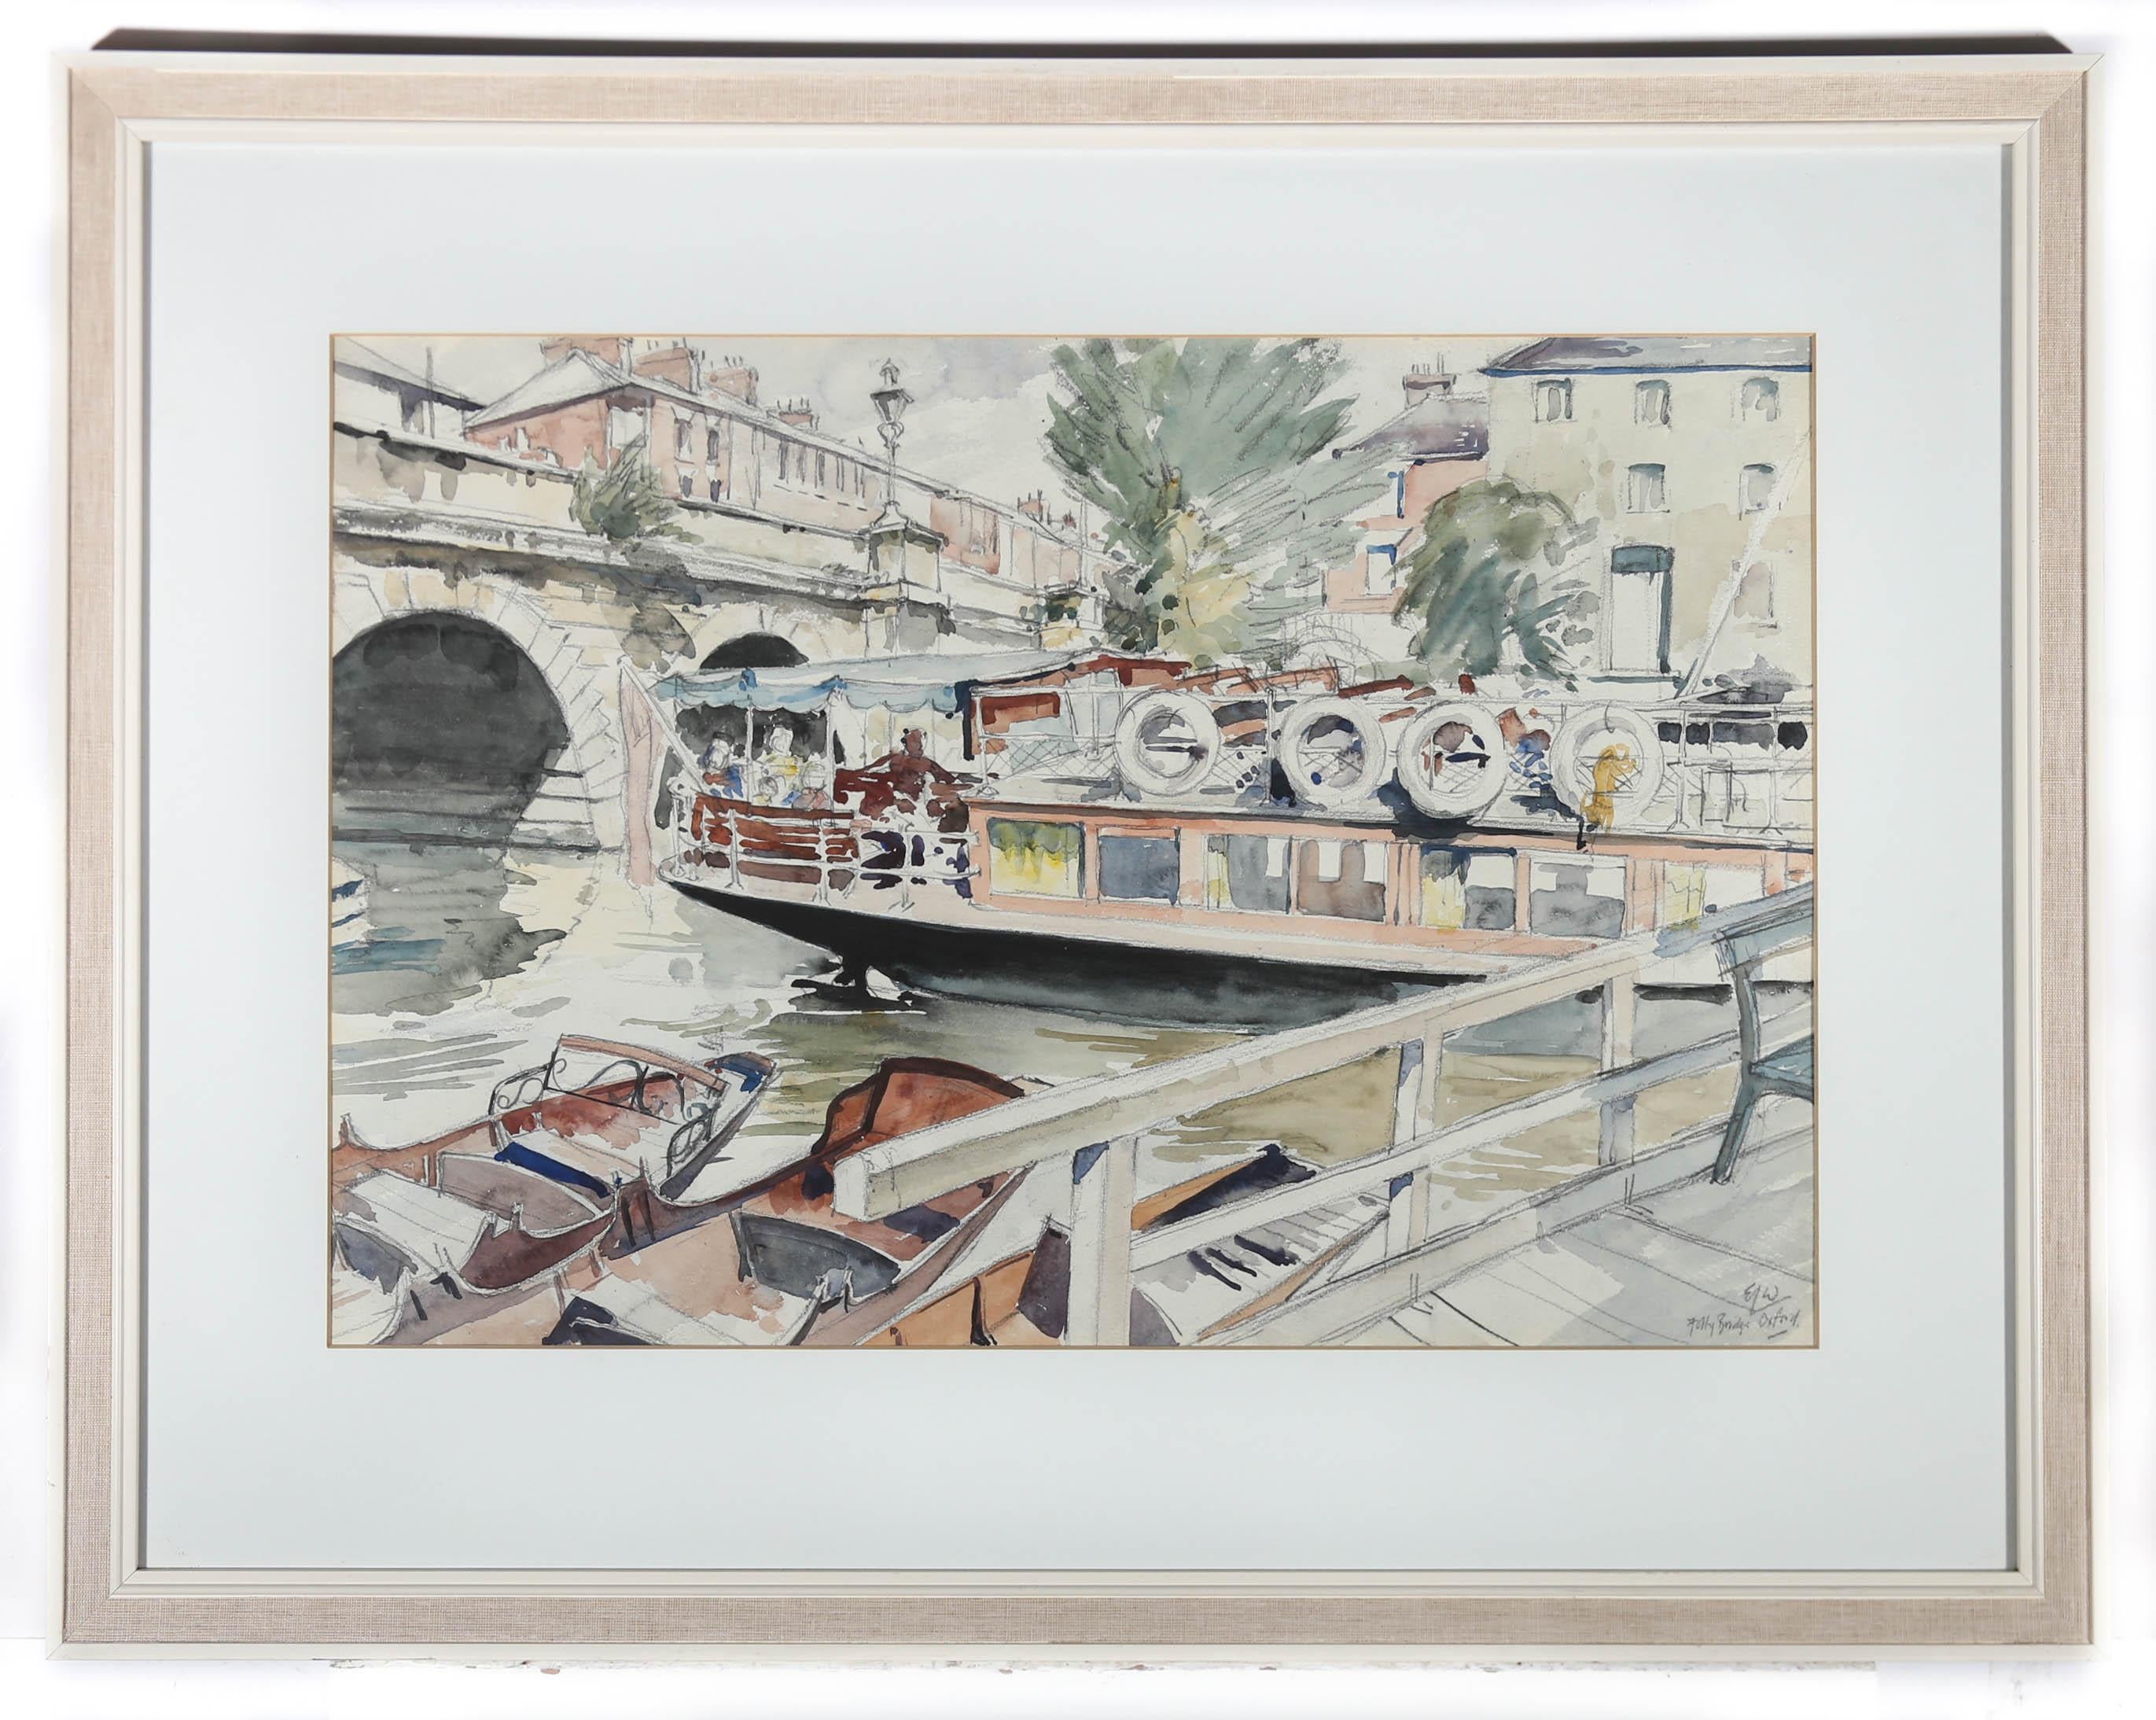 A charming Thames watercolour showing Folly Bridge in Oxford, with an empty canal boat passing through its arches. The artist has initialed and inscribed to the lower right, and the painting has been presented in a 20th Century white frame, with